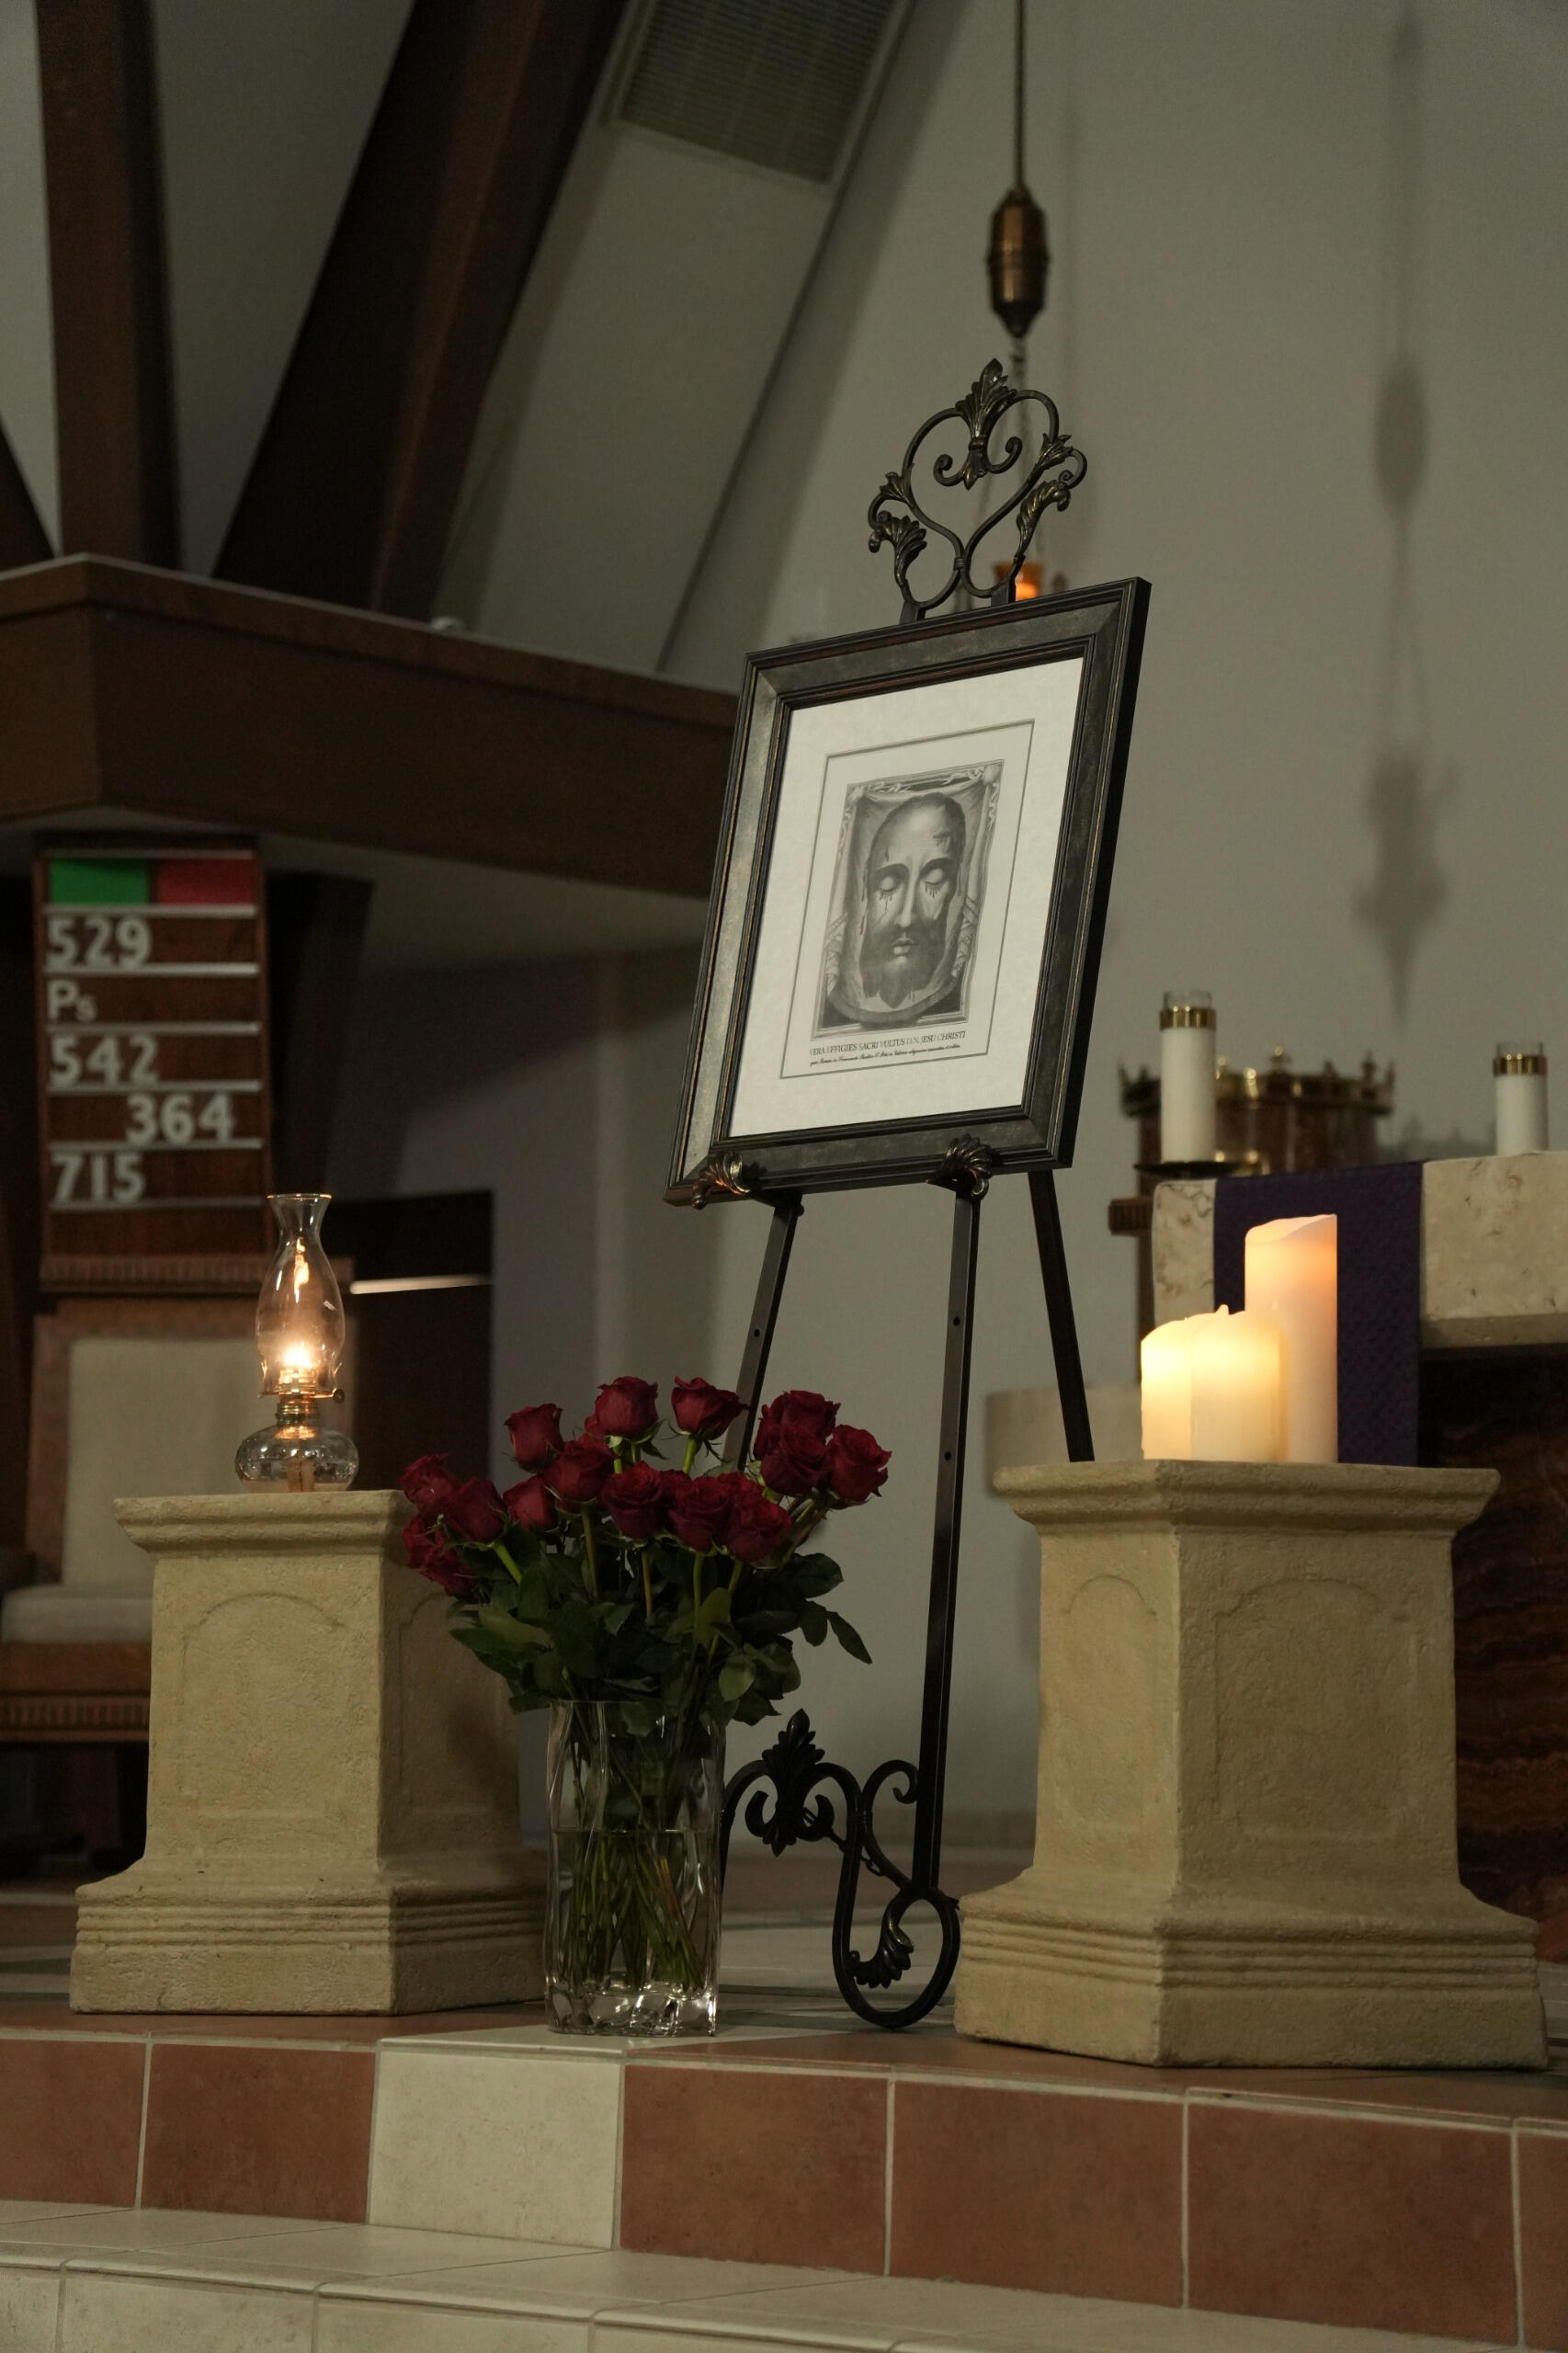 Photo of Holy Face relic in a picture frame with red roses in a vase